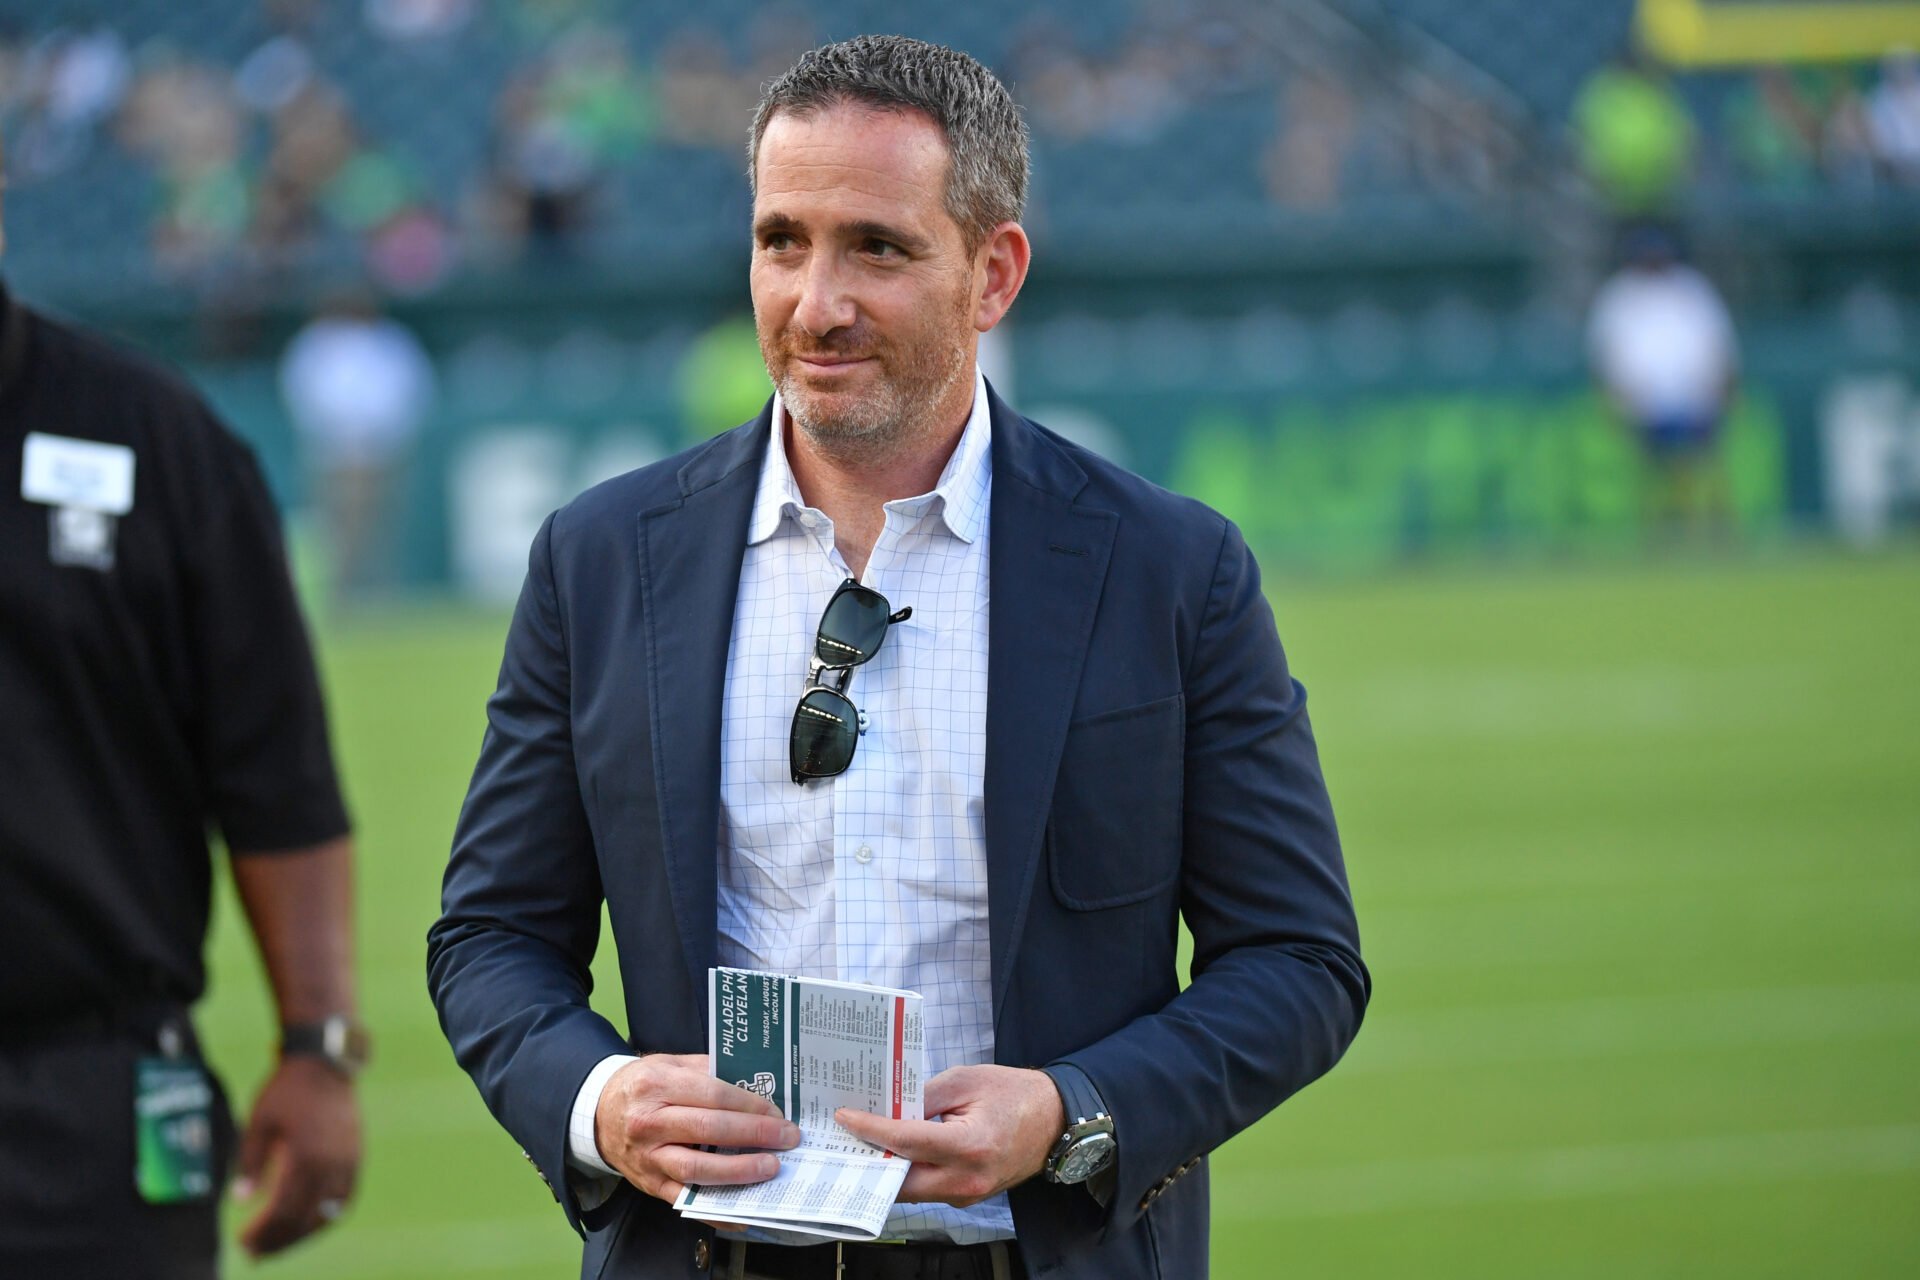 Philadelphia Eagles general manager Howie Roseman against the Cleveland Browns at Lincoln Financial Field.